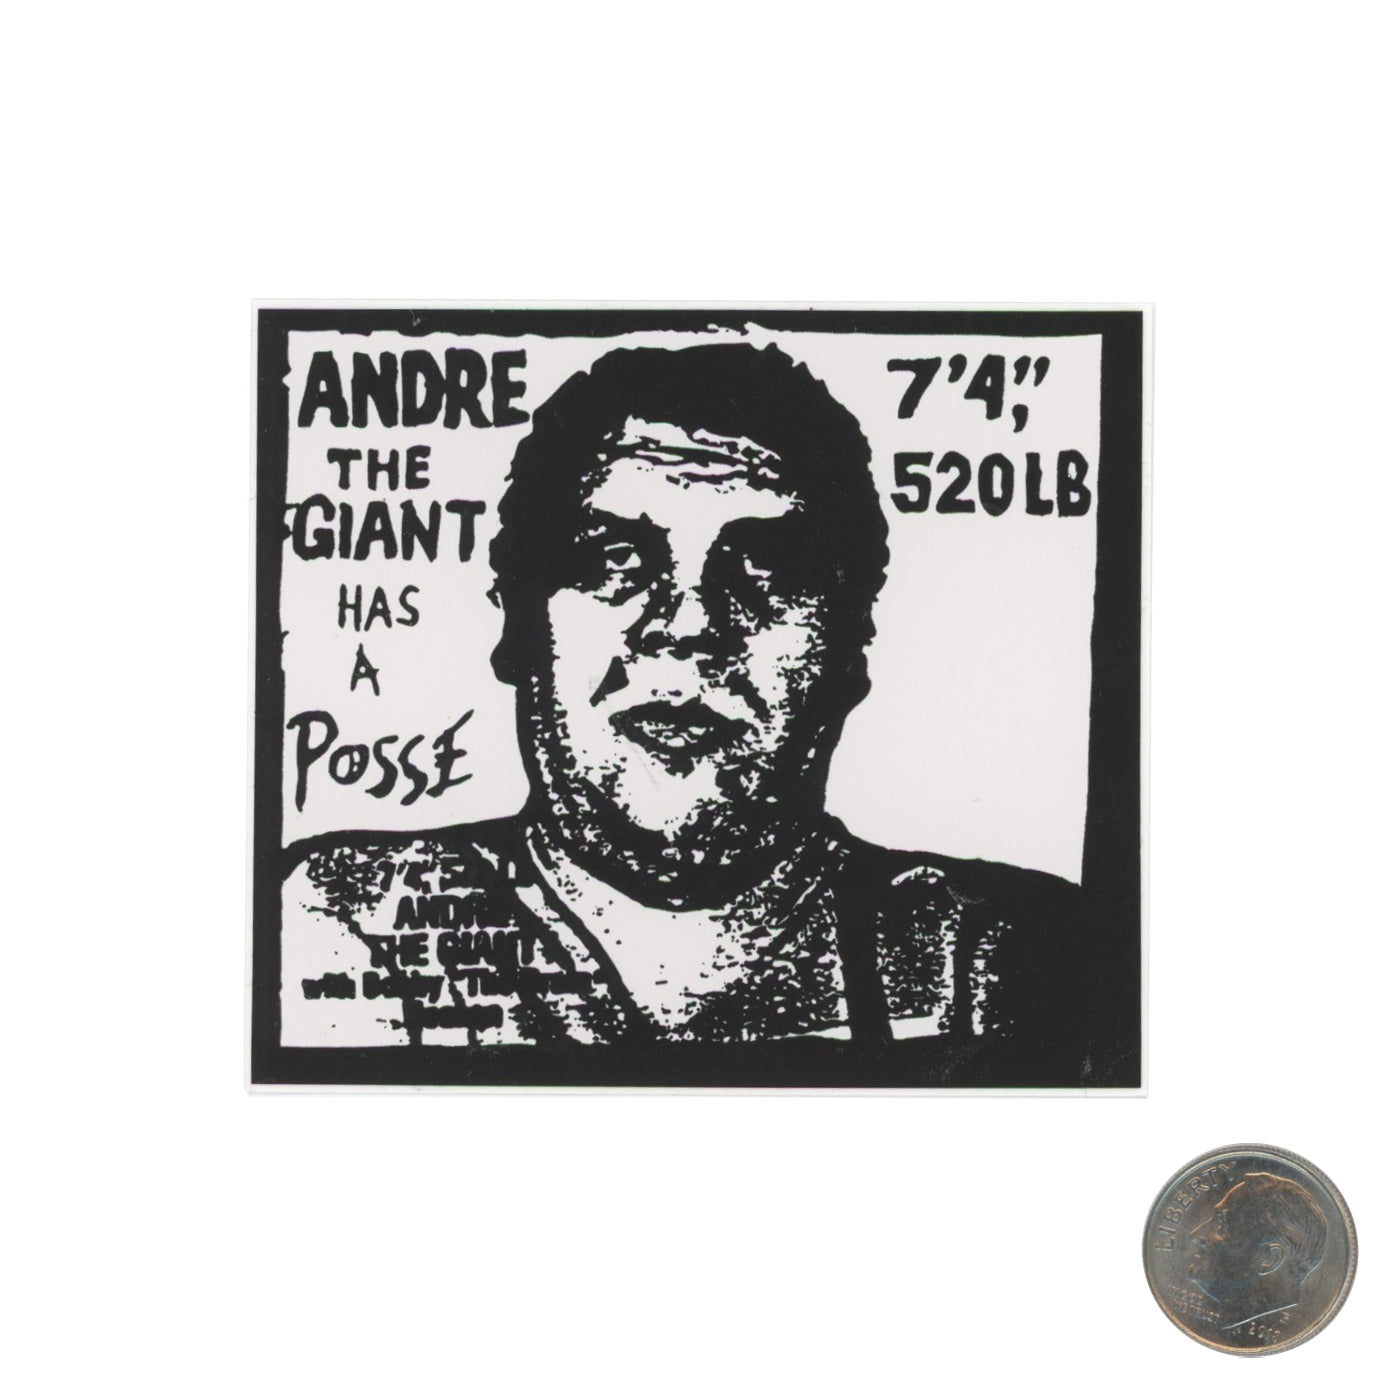 ANDRE THE GIANT HAS A POSSE Black White Sticker With Dime